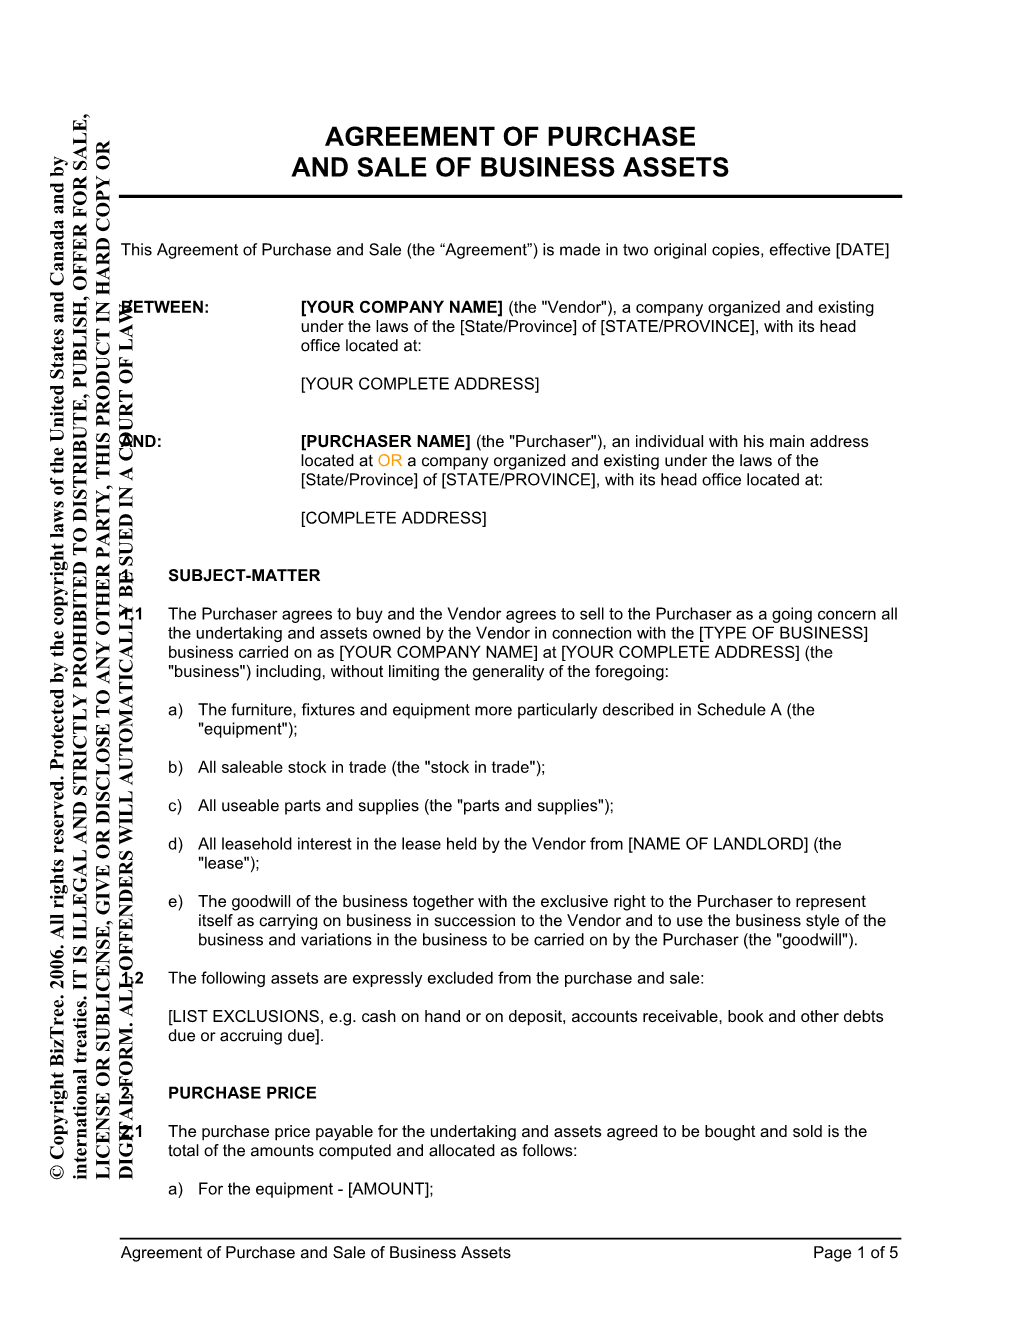 Agreement of Purchase